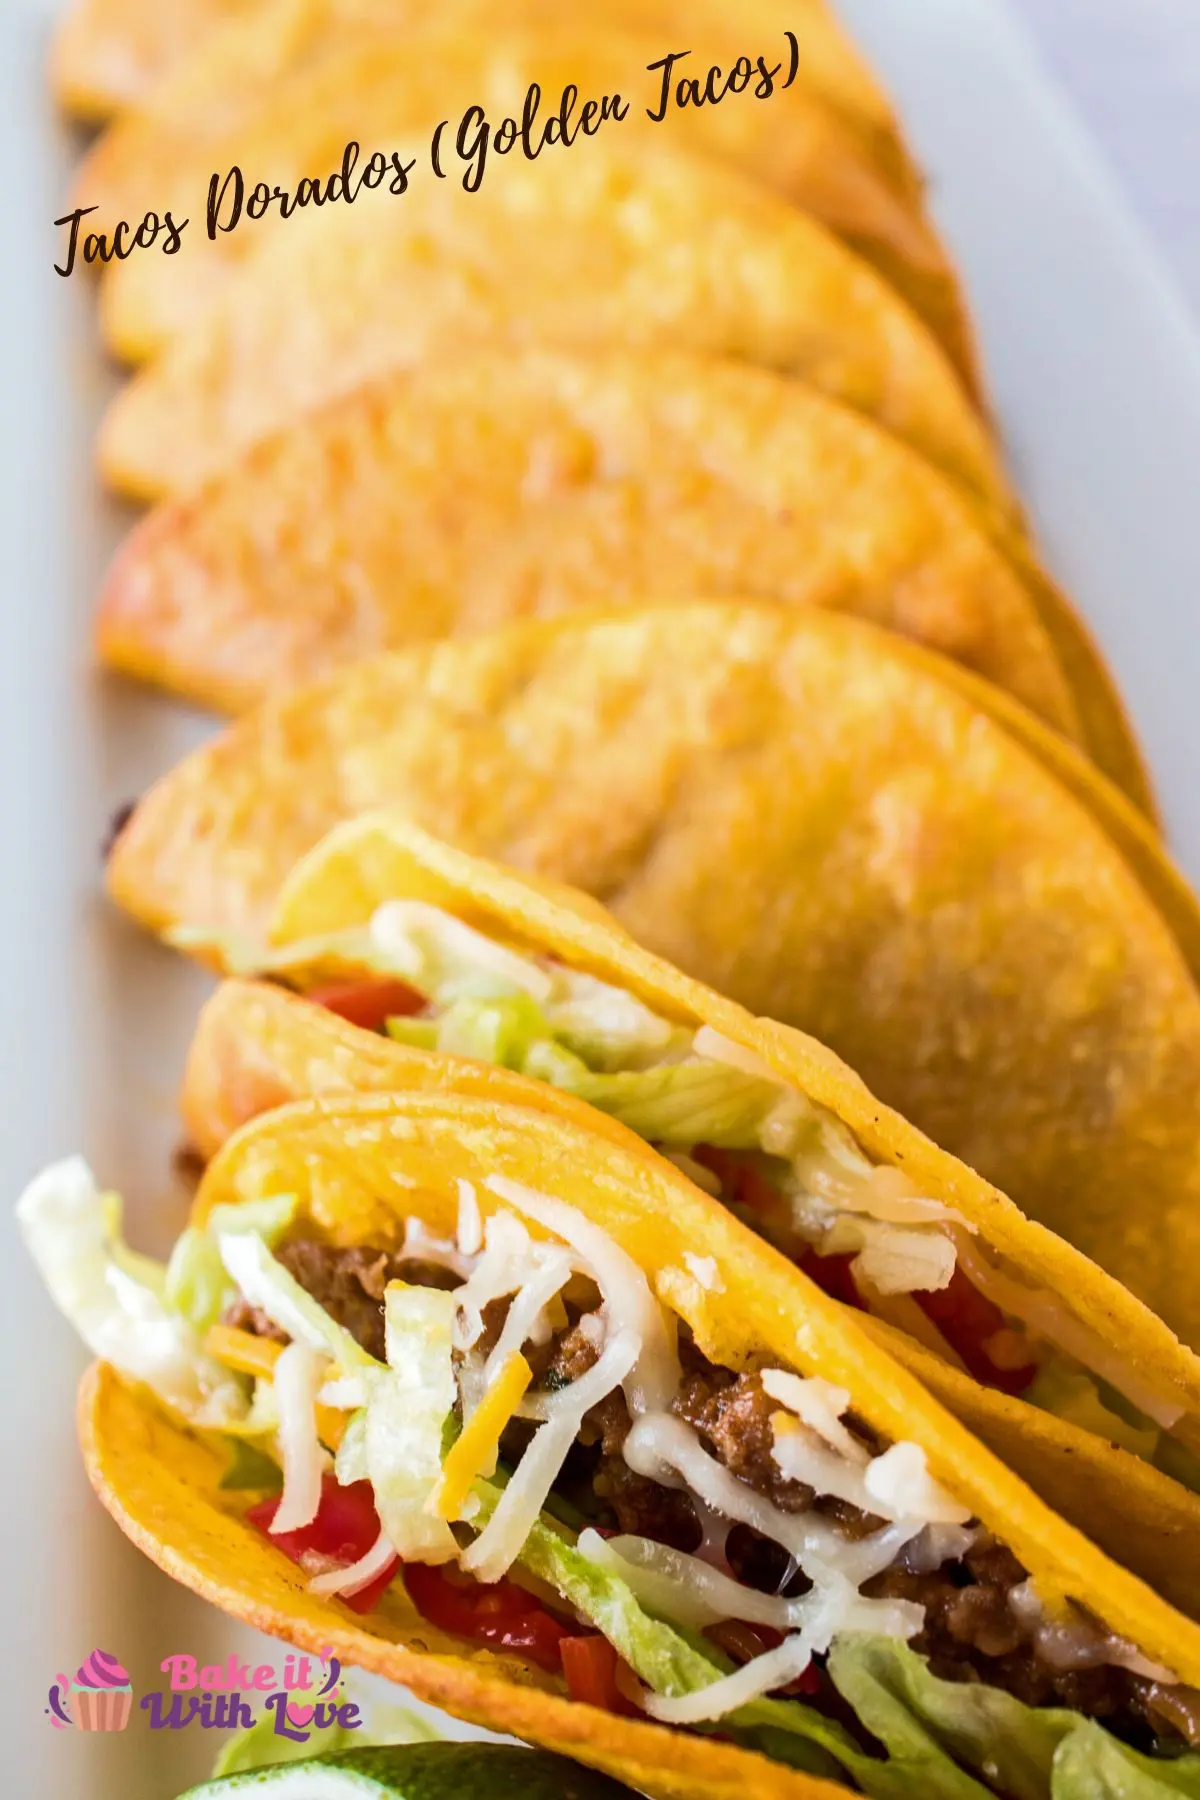 These easy to make taco dorados are the perfect crispy, chewy tacos that you're family won't stop asking for!!